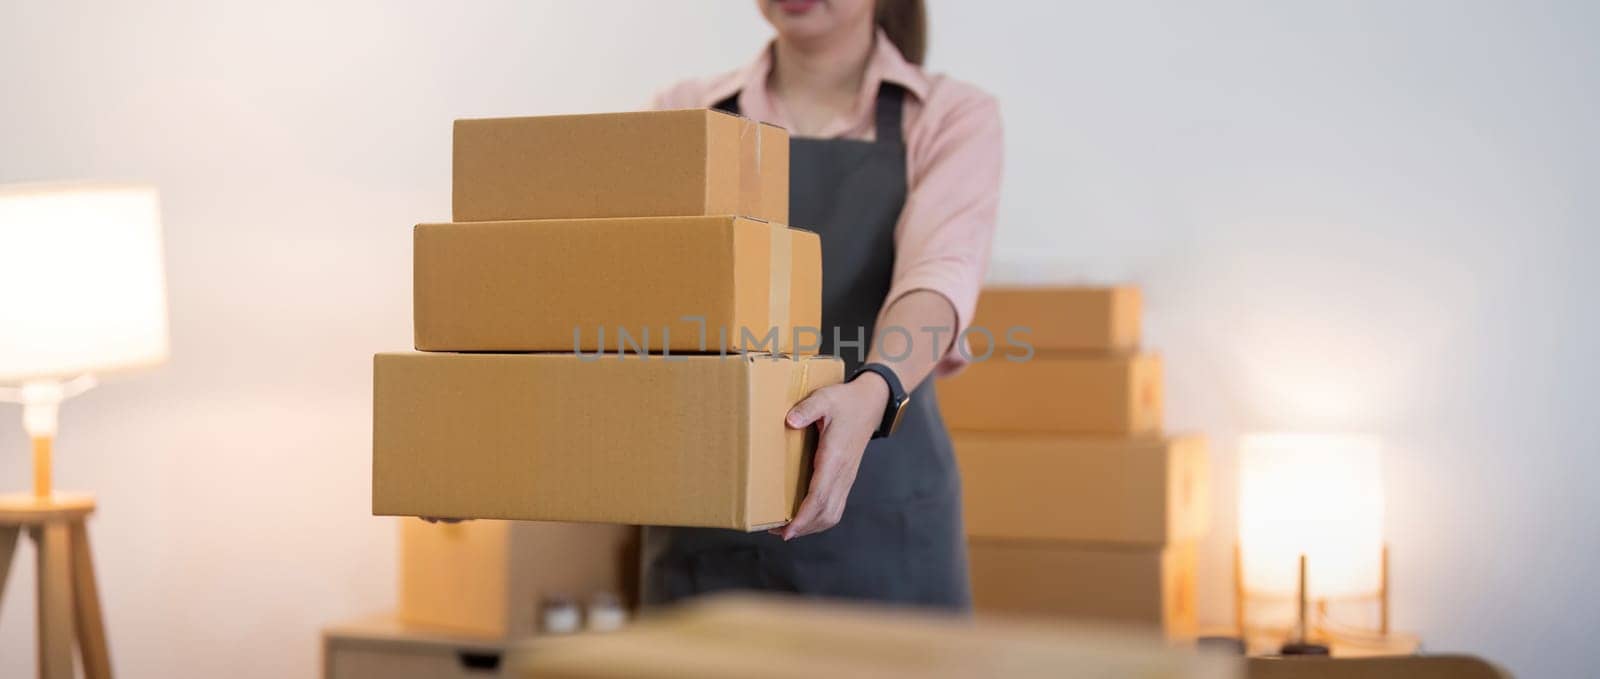 Asian woman entrepreneur prepare parcel box and check online order on laptop computer for commercial checking delivery. online marketing, packing box, SME seller. startup business concept.